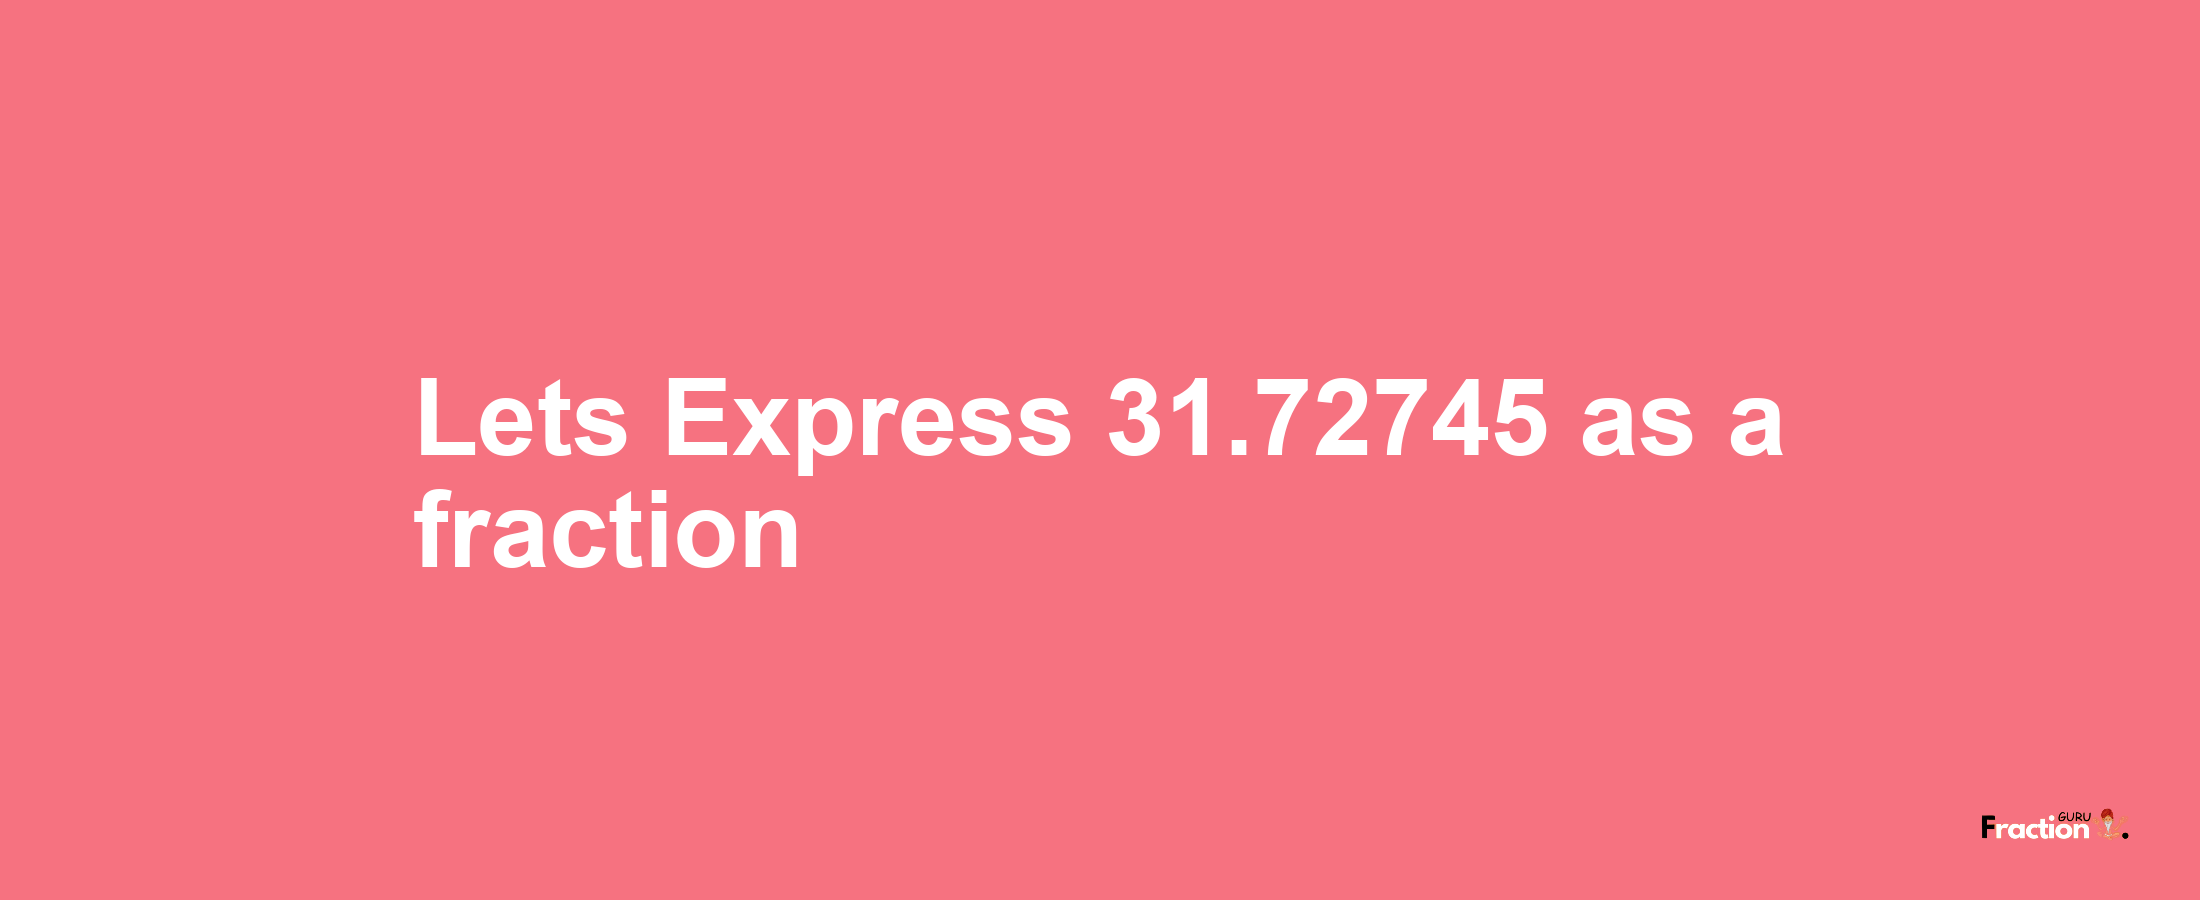 Lets Express 31.72745 as afraction